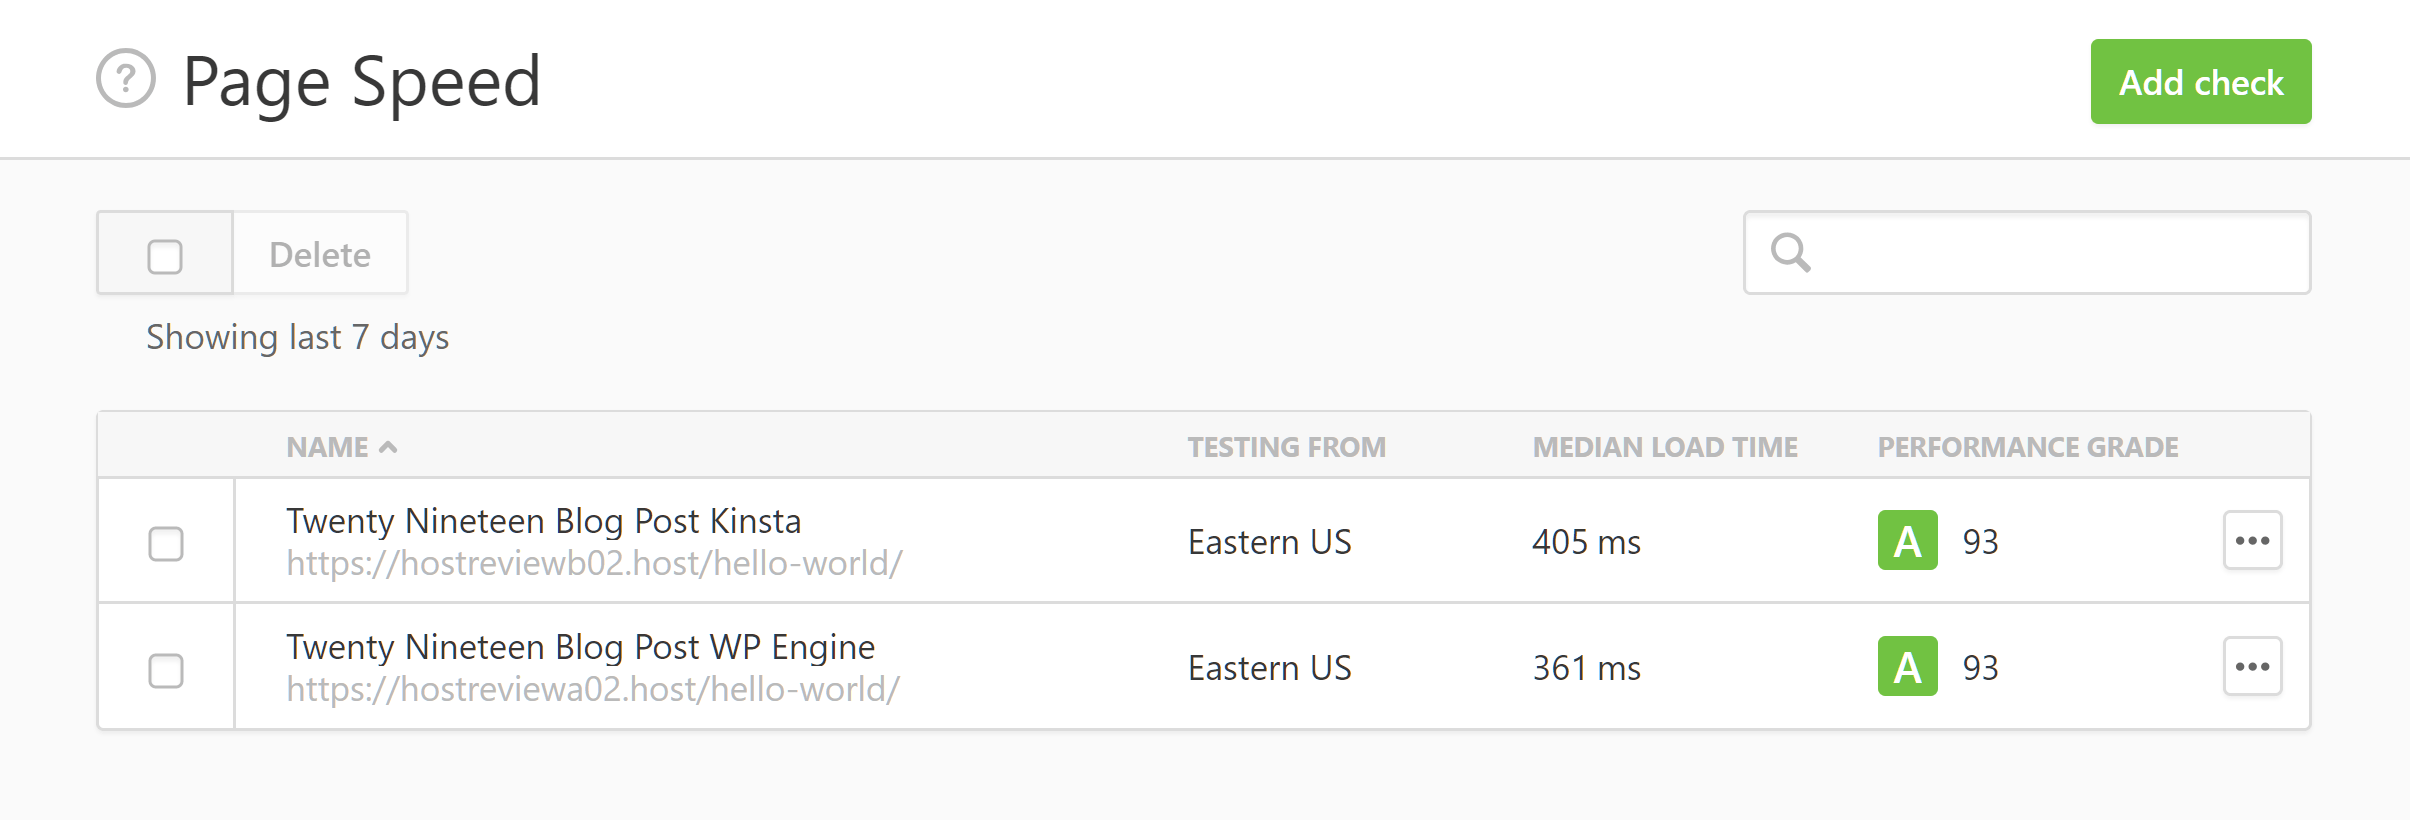 Pingdom Page Speed Results for Twenty Nineteen